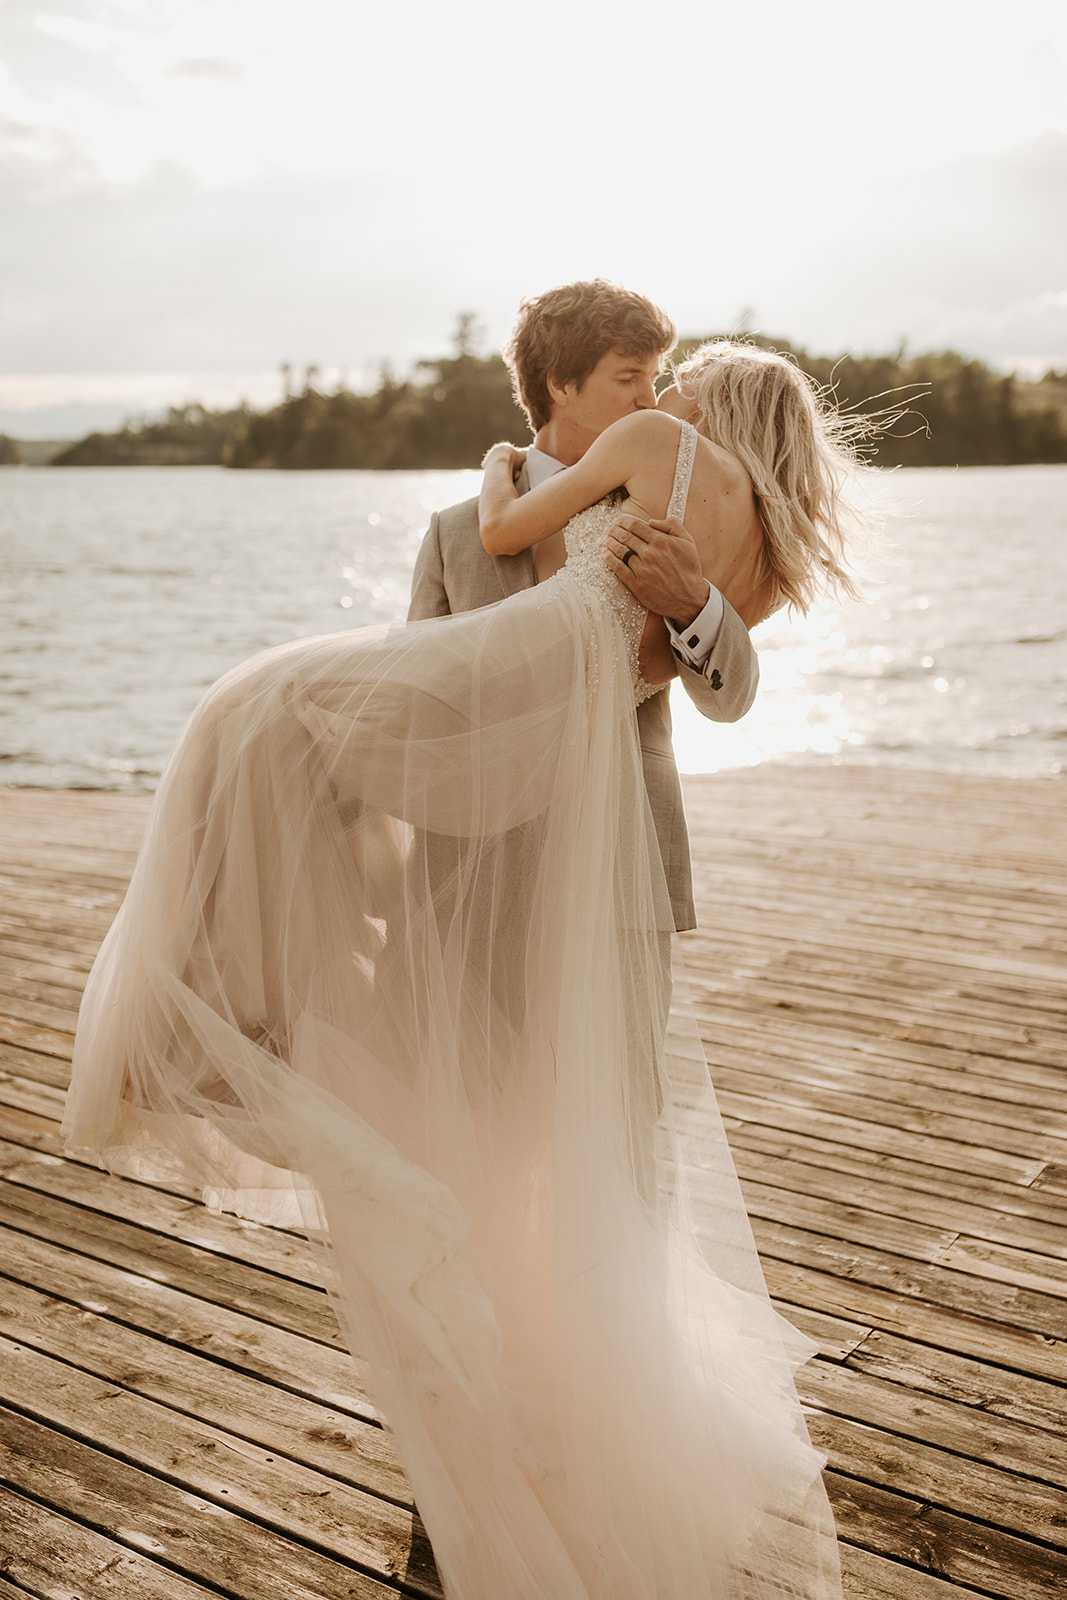 Bride and groom embracing at a dock at sunset during their wedding in Lake of the Woods, Kenora, Ontario,